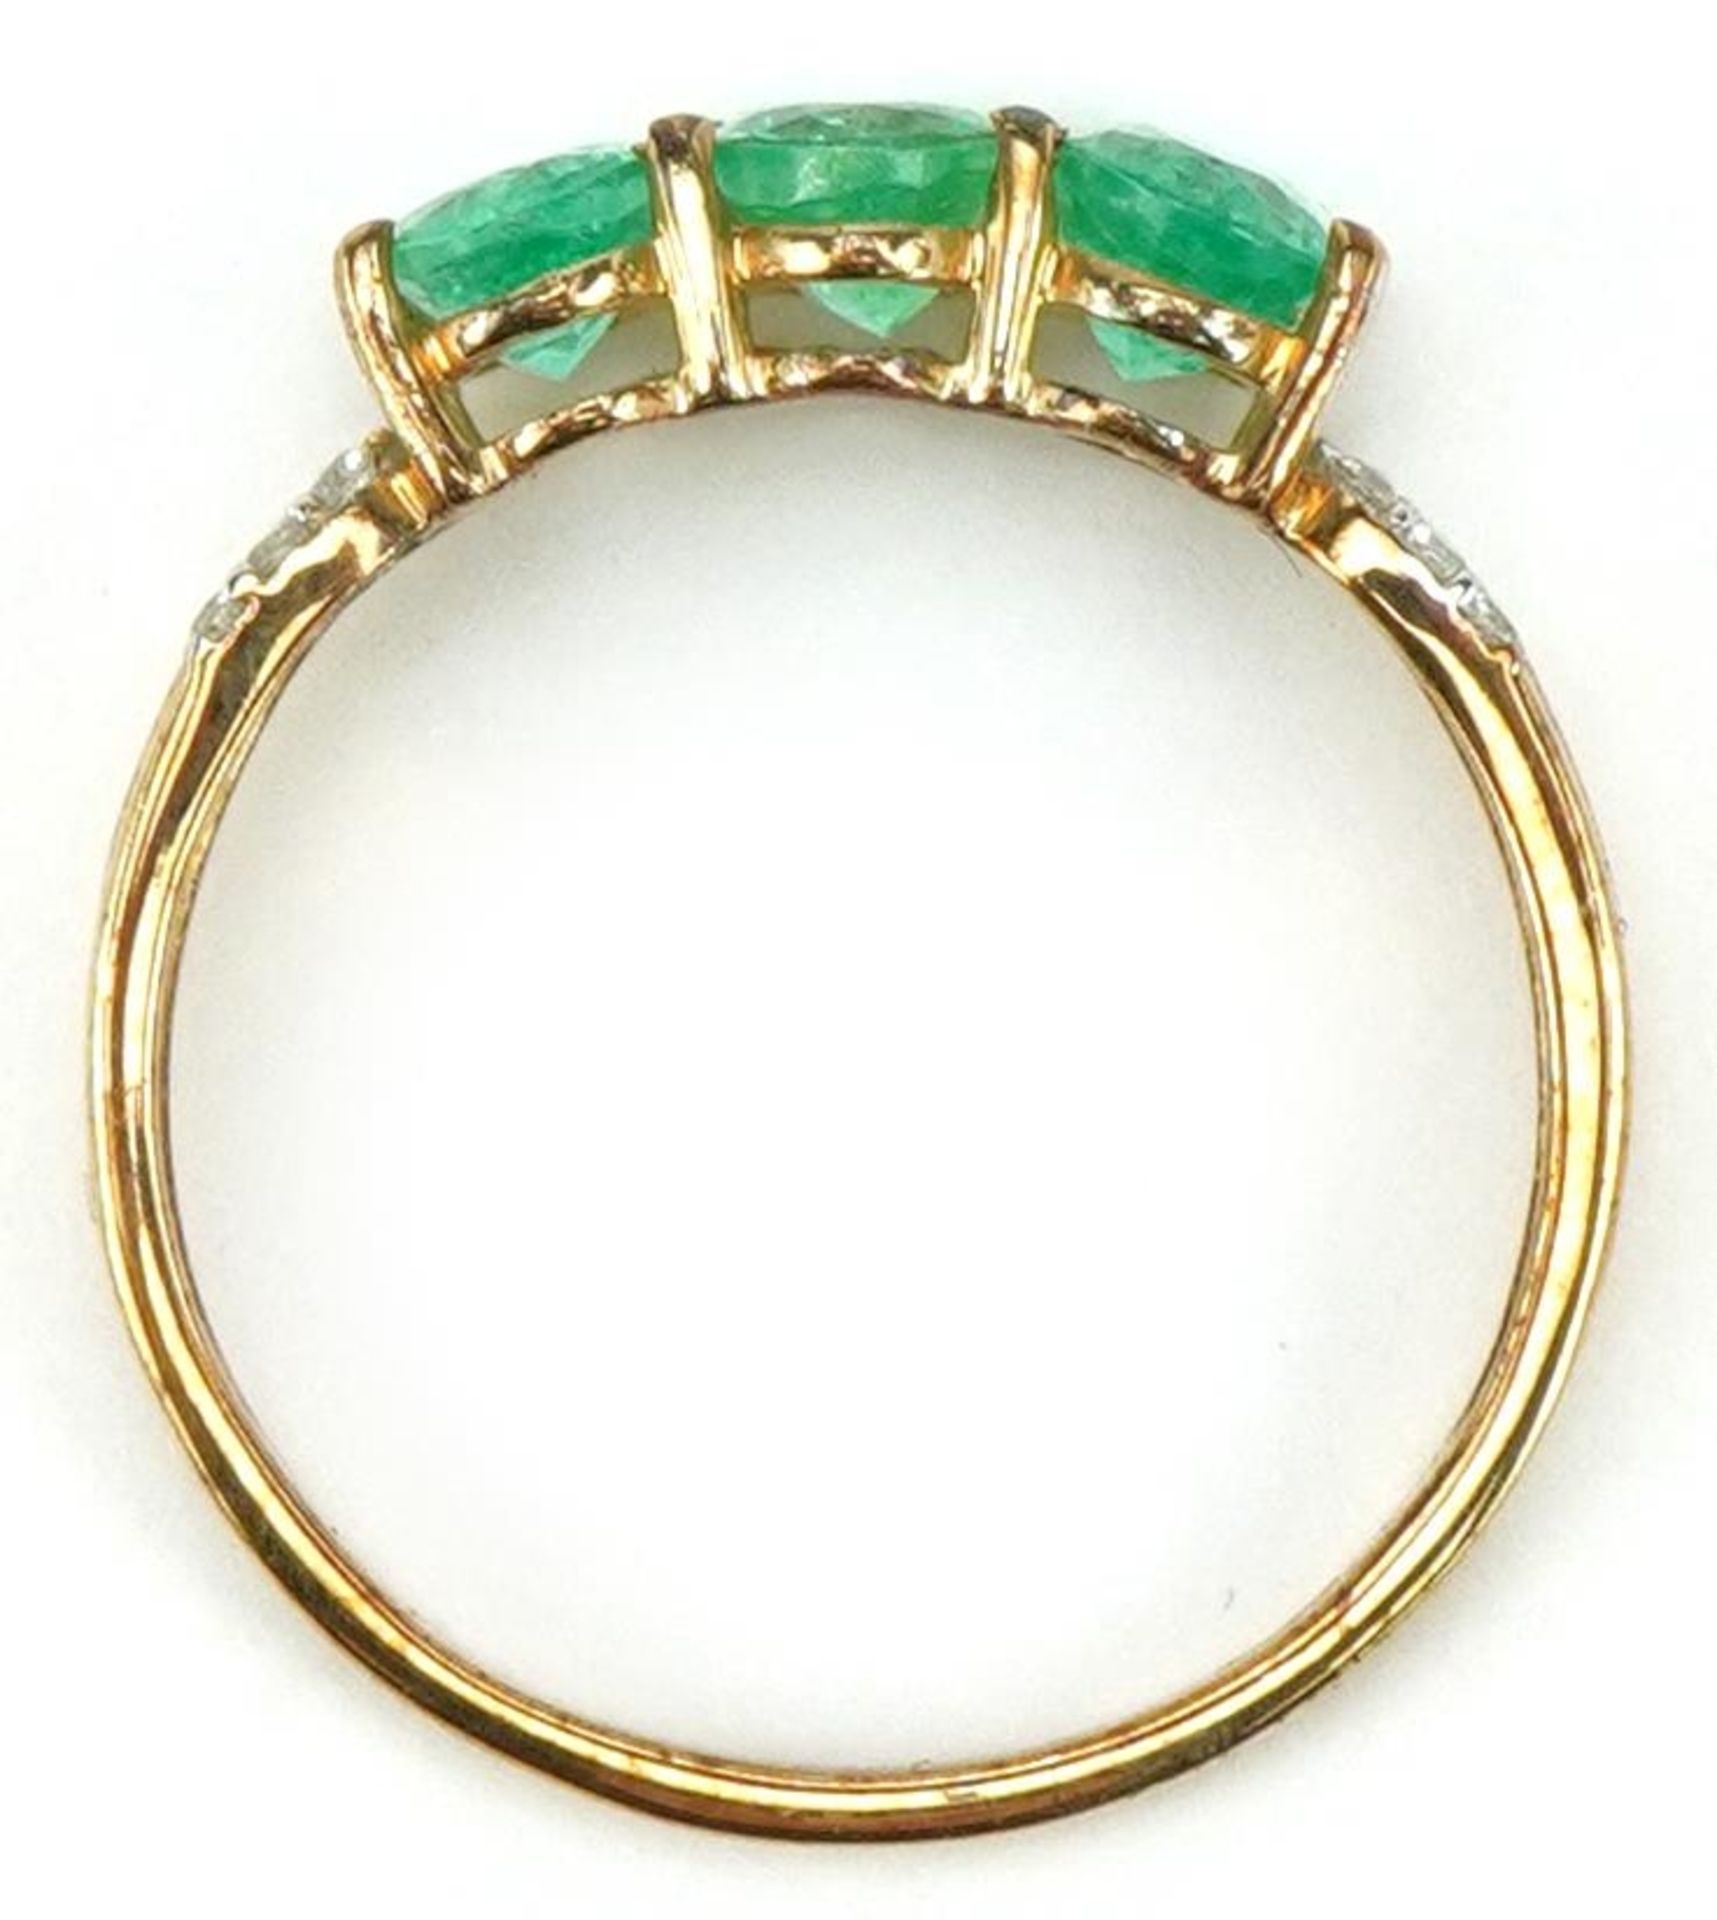 9ct gold emerald three stone ring with white spinel set shoulders, size N, 2.0g - Image 3 of 5